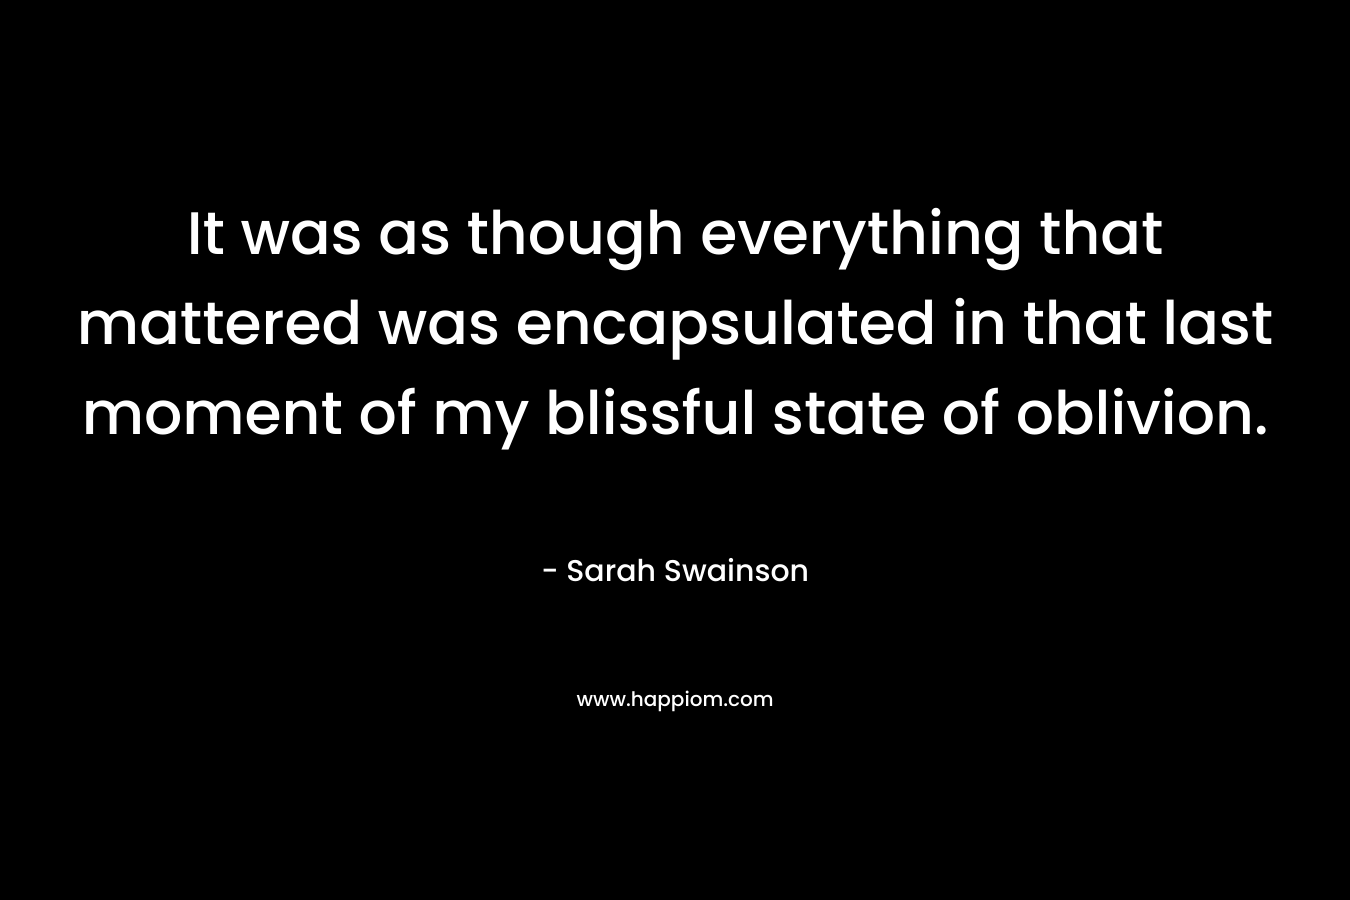 It was as though everything that mattered was encapsulated in that last moment of my blissful state of oblivion. – Sarah Swainson